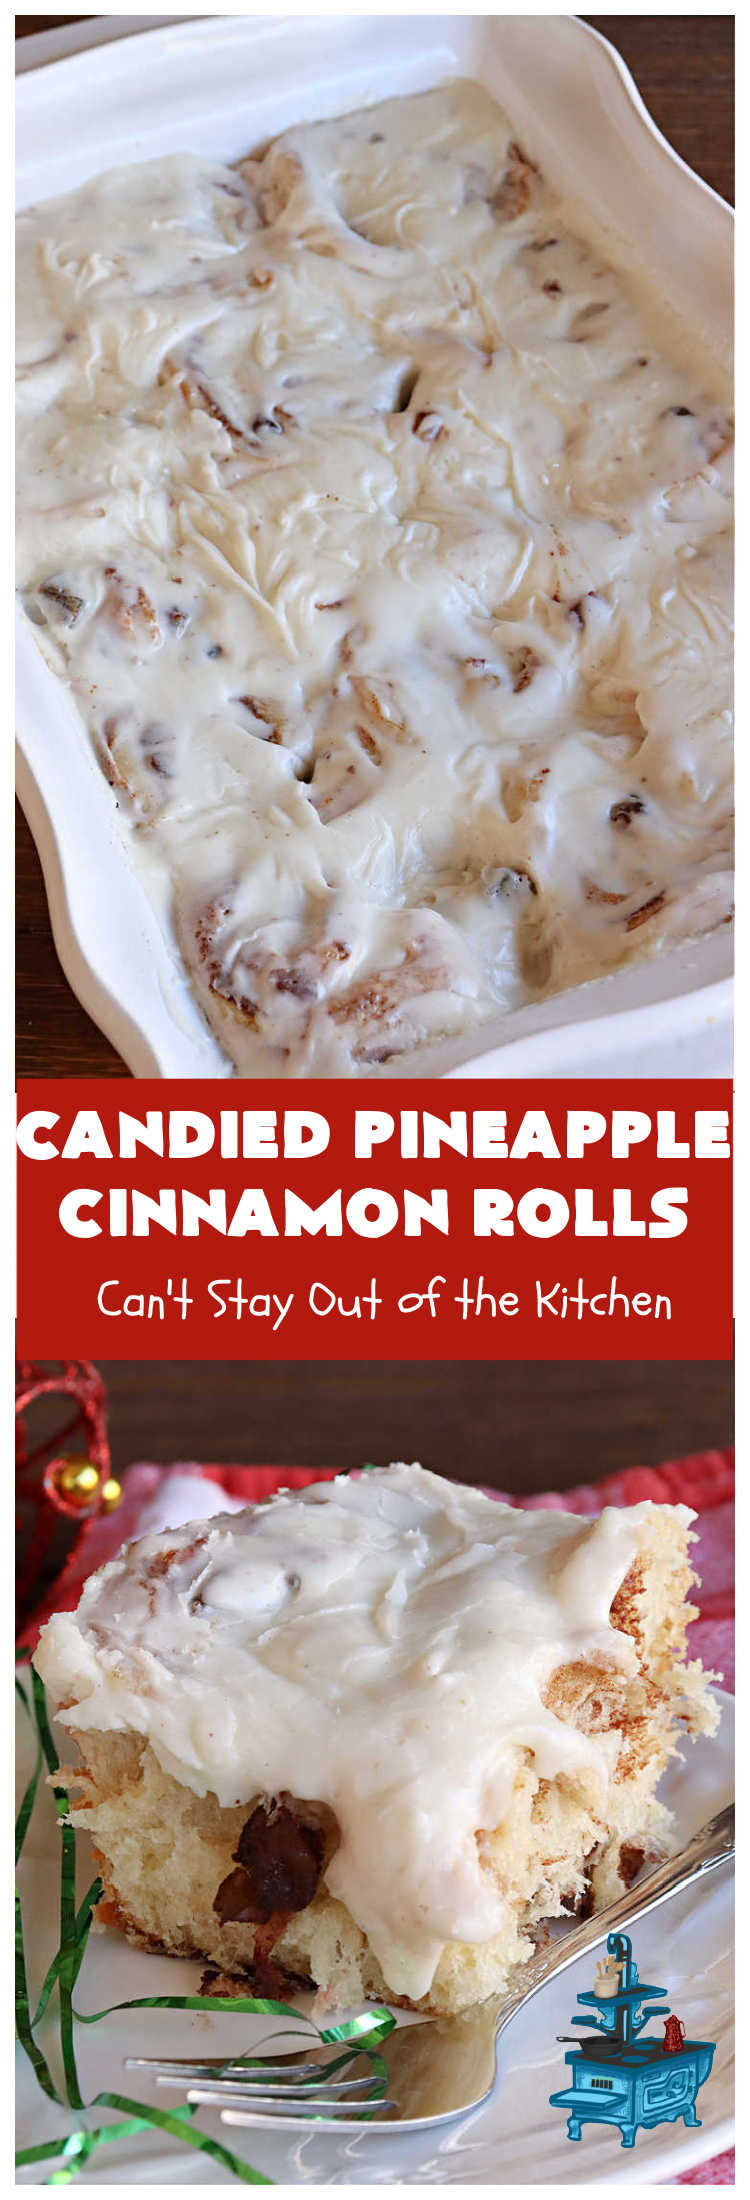 Candied Pineapple Cinnamon Rolls | Can't Stay Out of the Kitchen | These luscious #CinnamonRolls include #CandiedPineapple & they're iced with a thick, drool-worthy #buttercream icing. Every bite will rock your world! Enjoy for a #holiday #breakfast or #brunch. #Thanksgiving #Christmas #ParadiseFruit #pineapple #SweetRolls #HolidayBreakfast